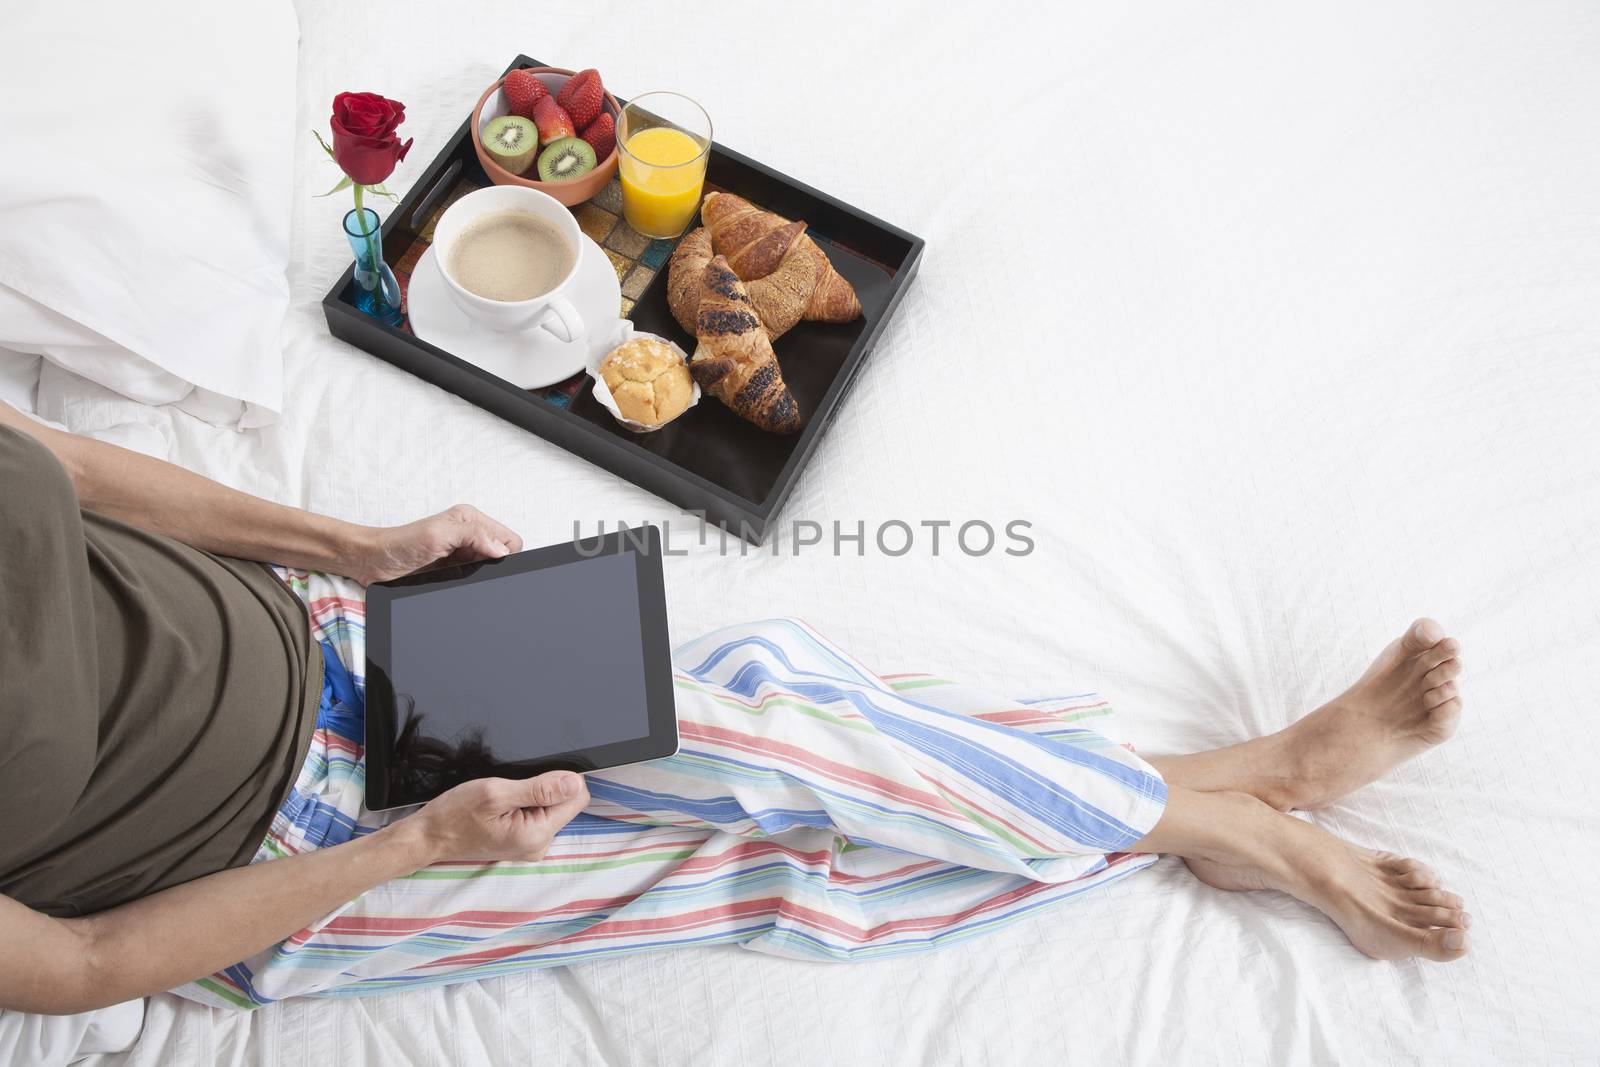 woman green shirt striped pajama pants sitting on white bed with digital tablet blank screen and breakfast tray croissants orange juice strawberry kiwi cupcake red rose flower